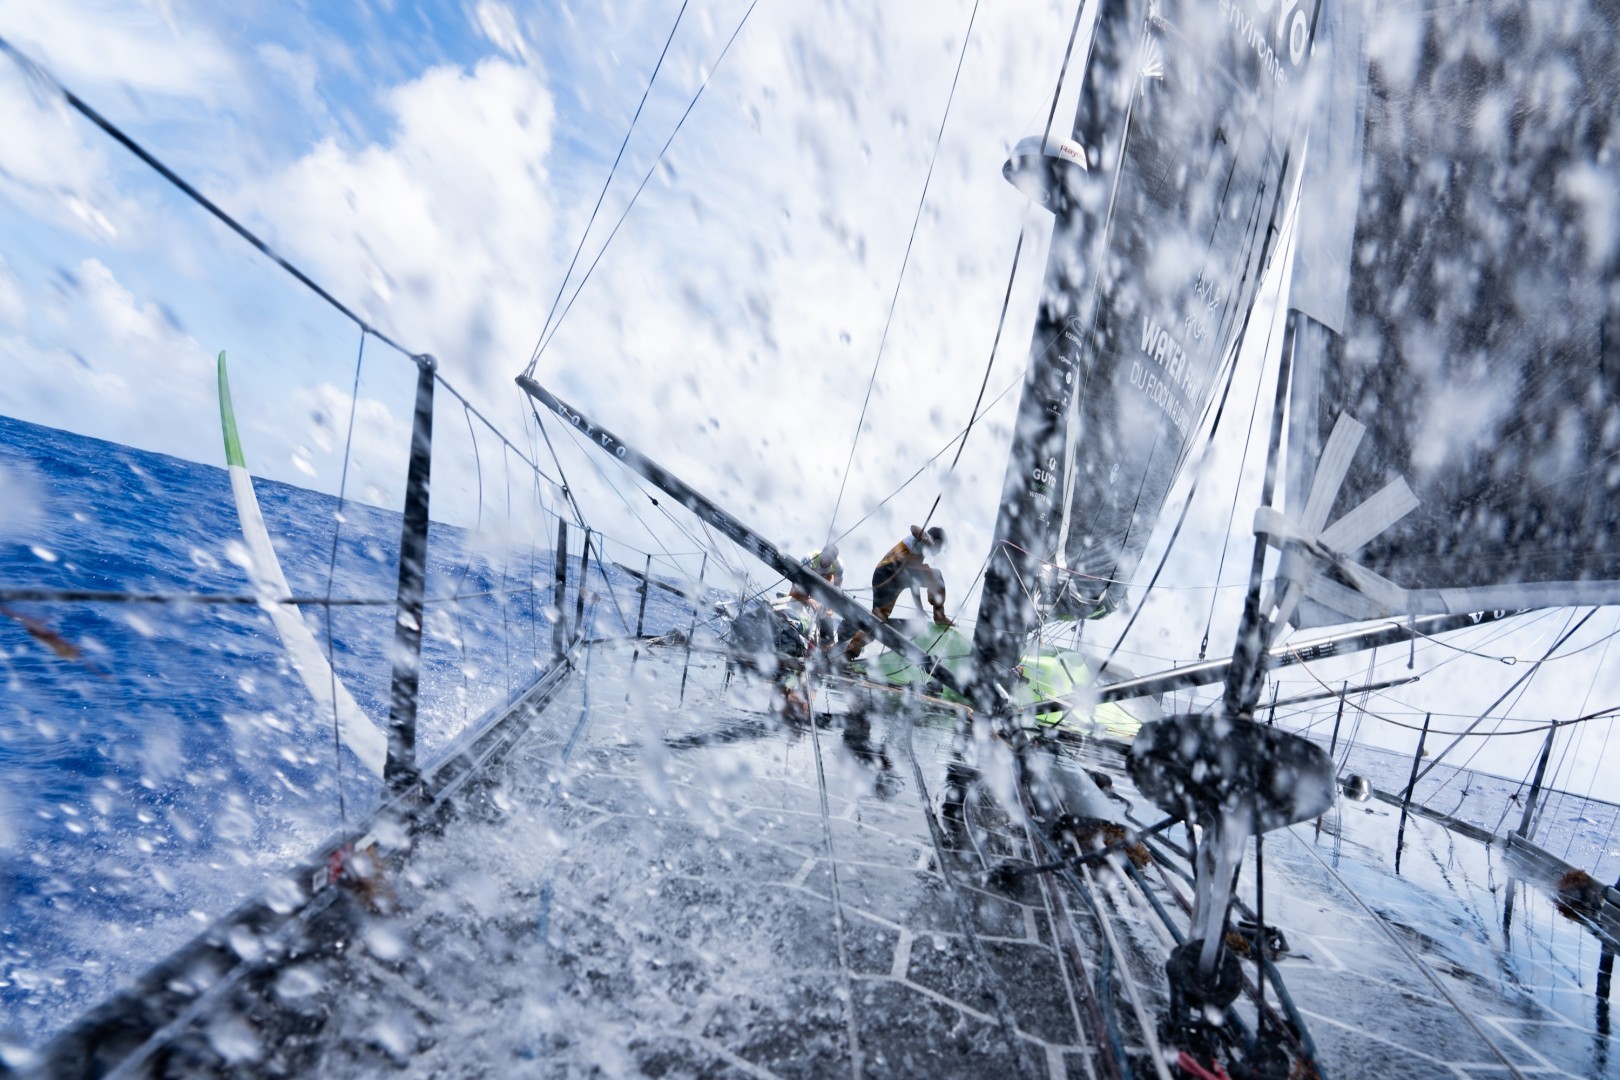 Leg 4 Day 12 onboard Guyot environnement - Team Europe. Waves cover the deck as we are sailing up North to Newport.
© Gauthier Lebec